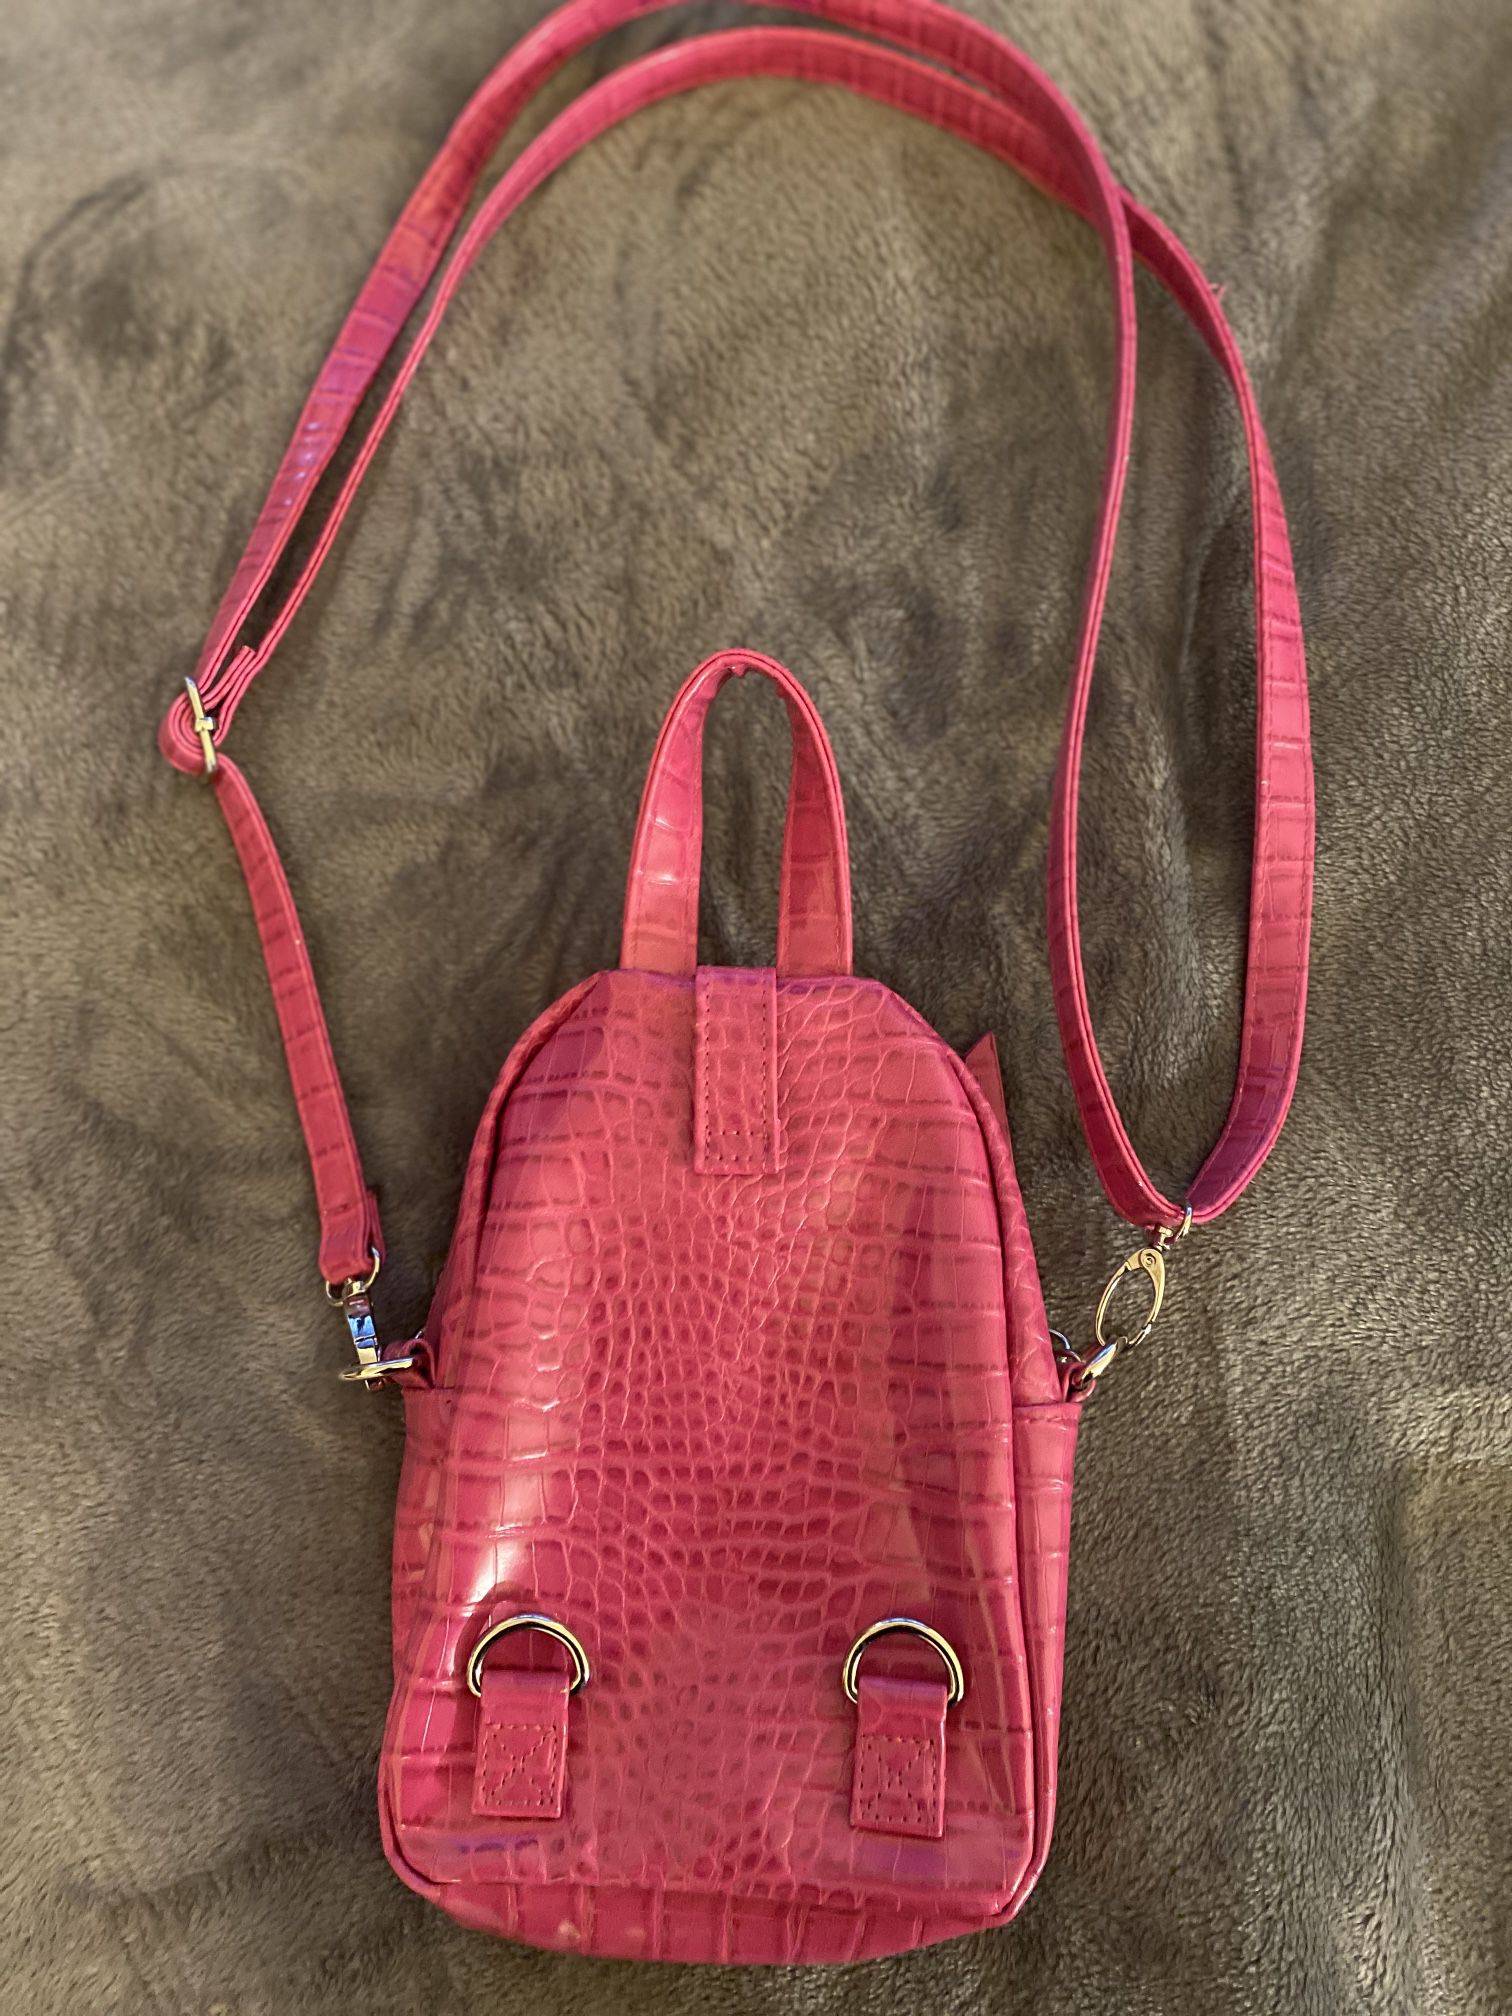 Pink Purse Or Backpack